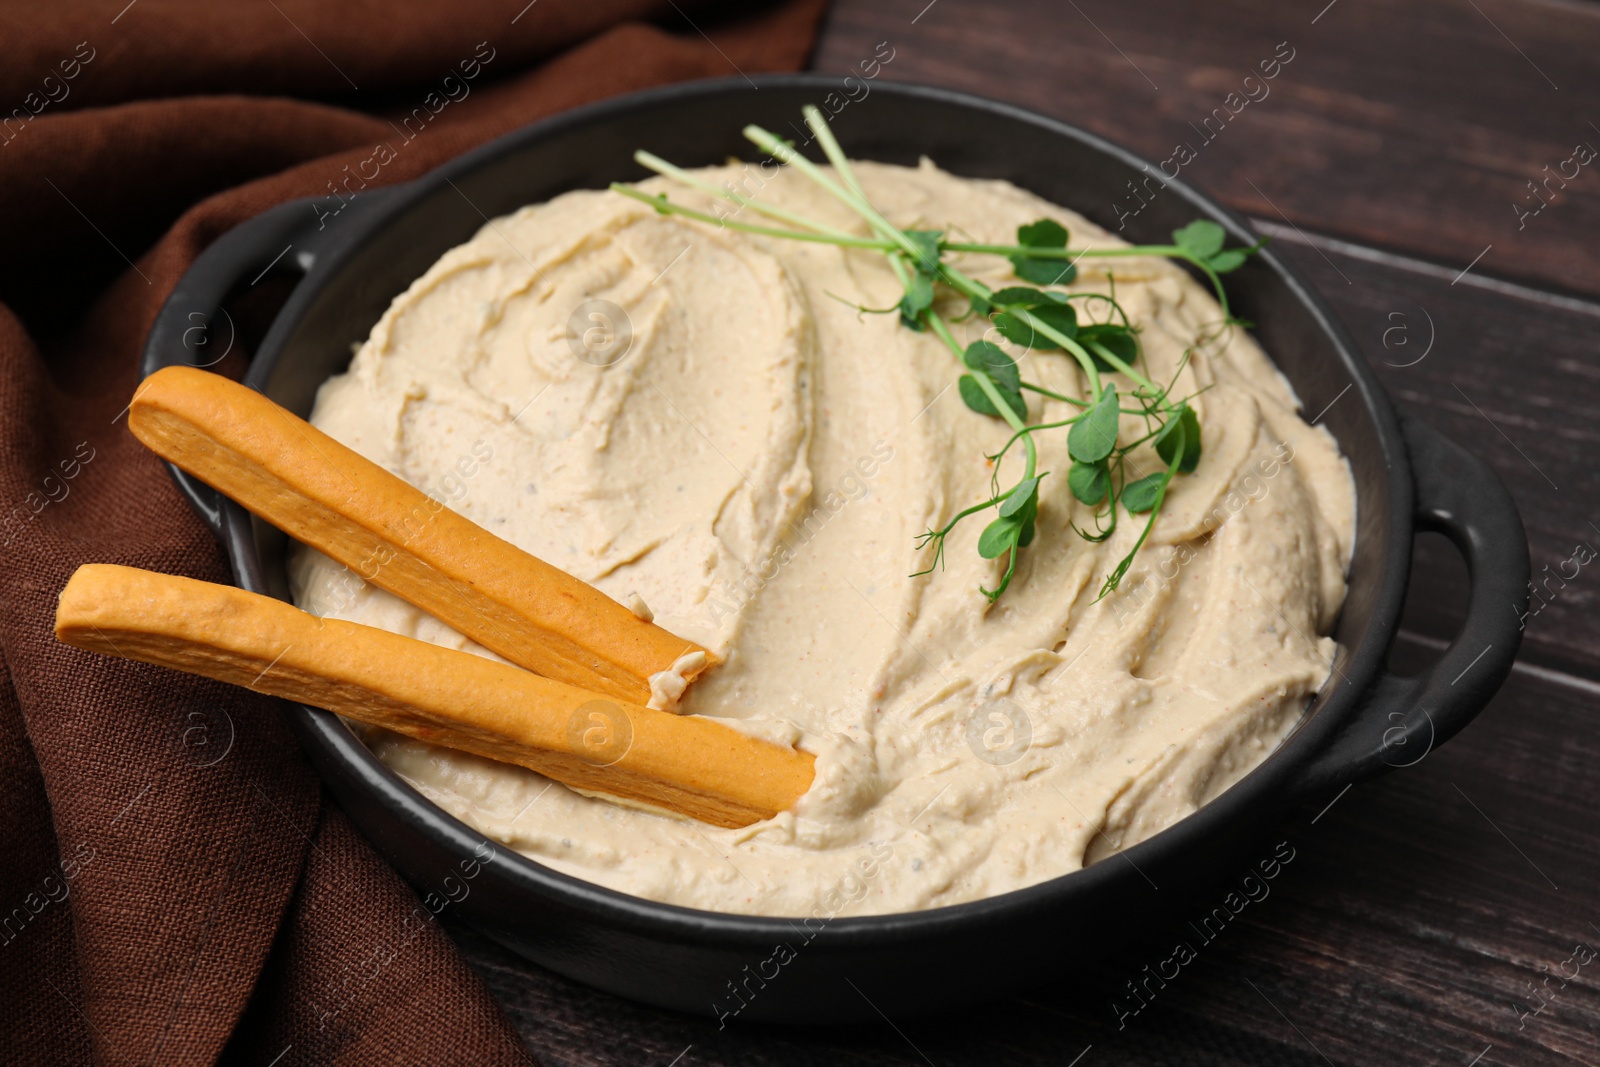 Photo of Delicious hummus with grissini sticks on wooden table, closeup